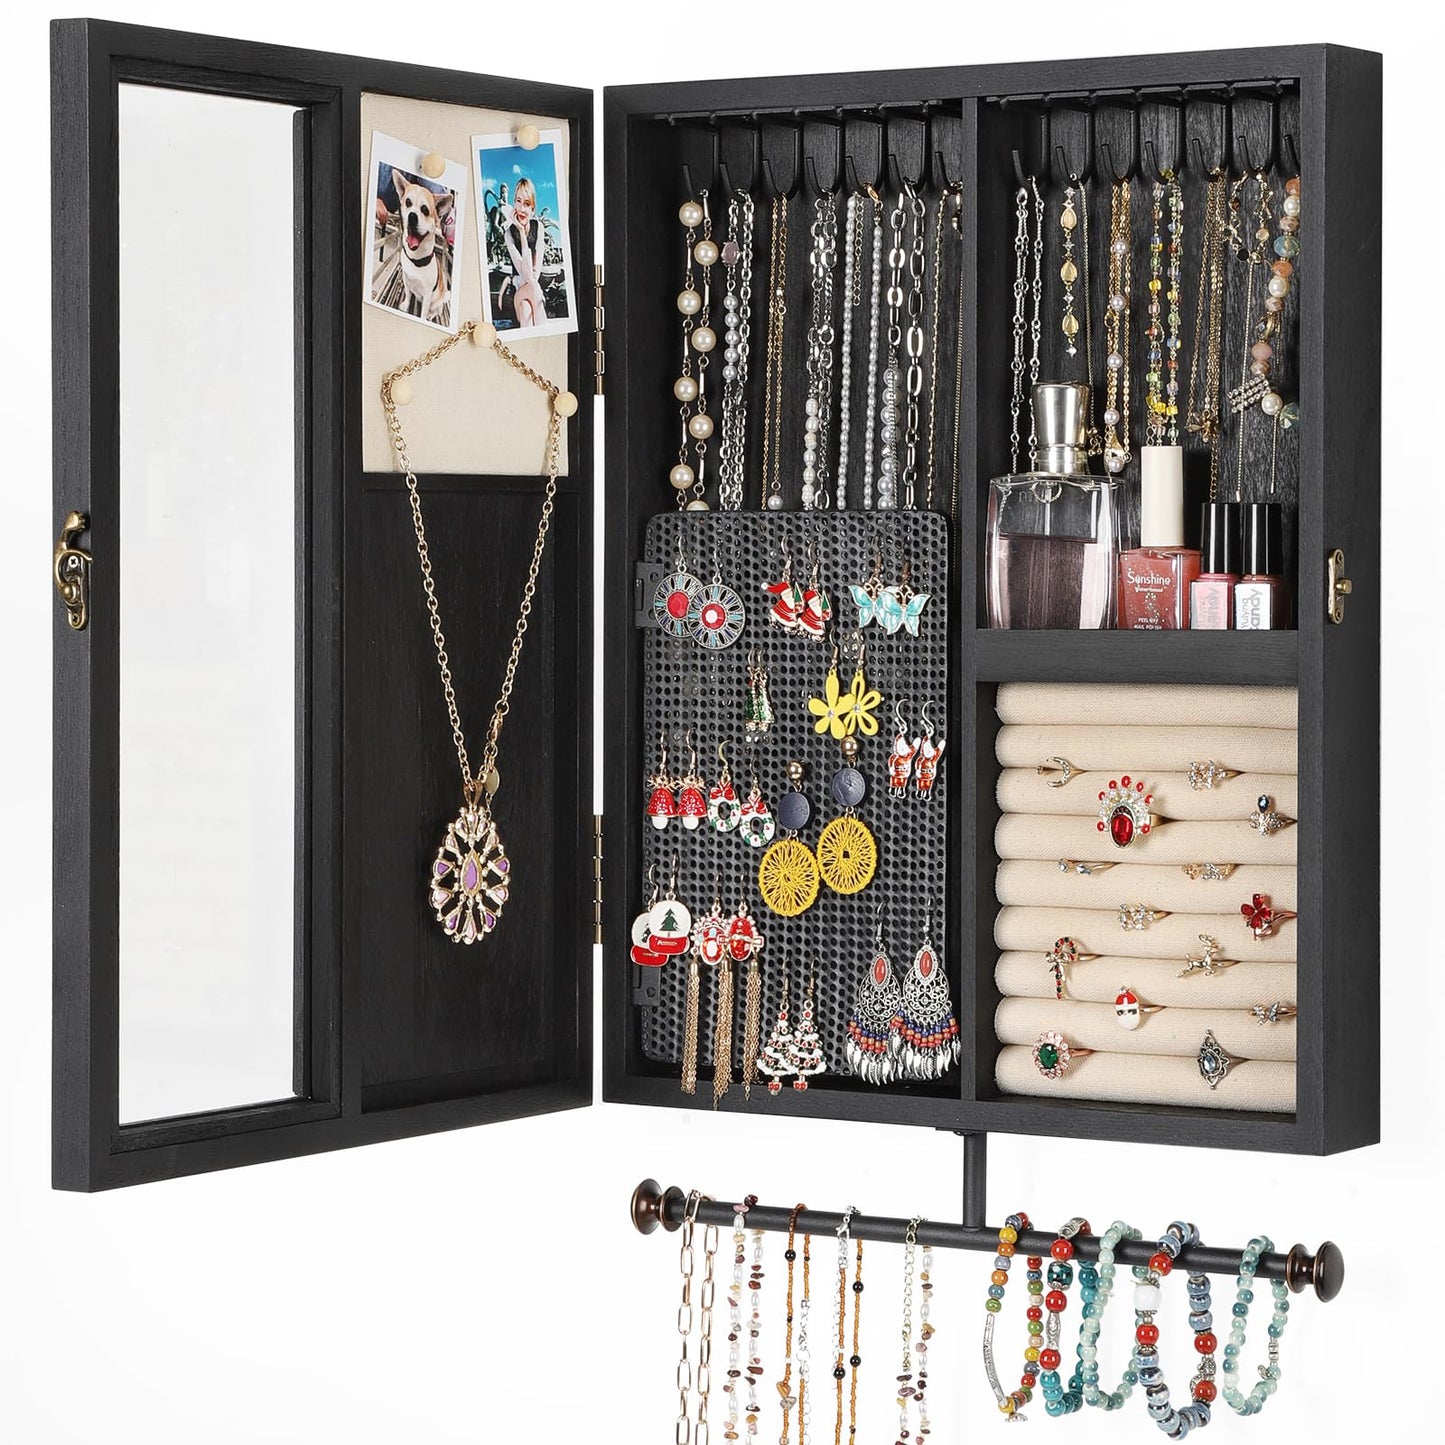 Keebofly Wall Mounted Jewelry Organizer With Rustic Wood Large Space Jewelry Cabinet, Holder, Storage Box for Necklaces, Earrings, Bracelets, Ring